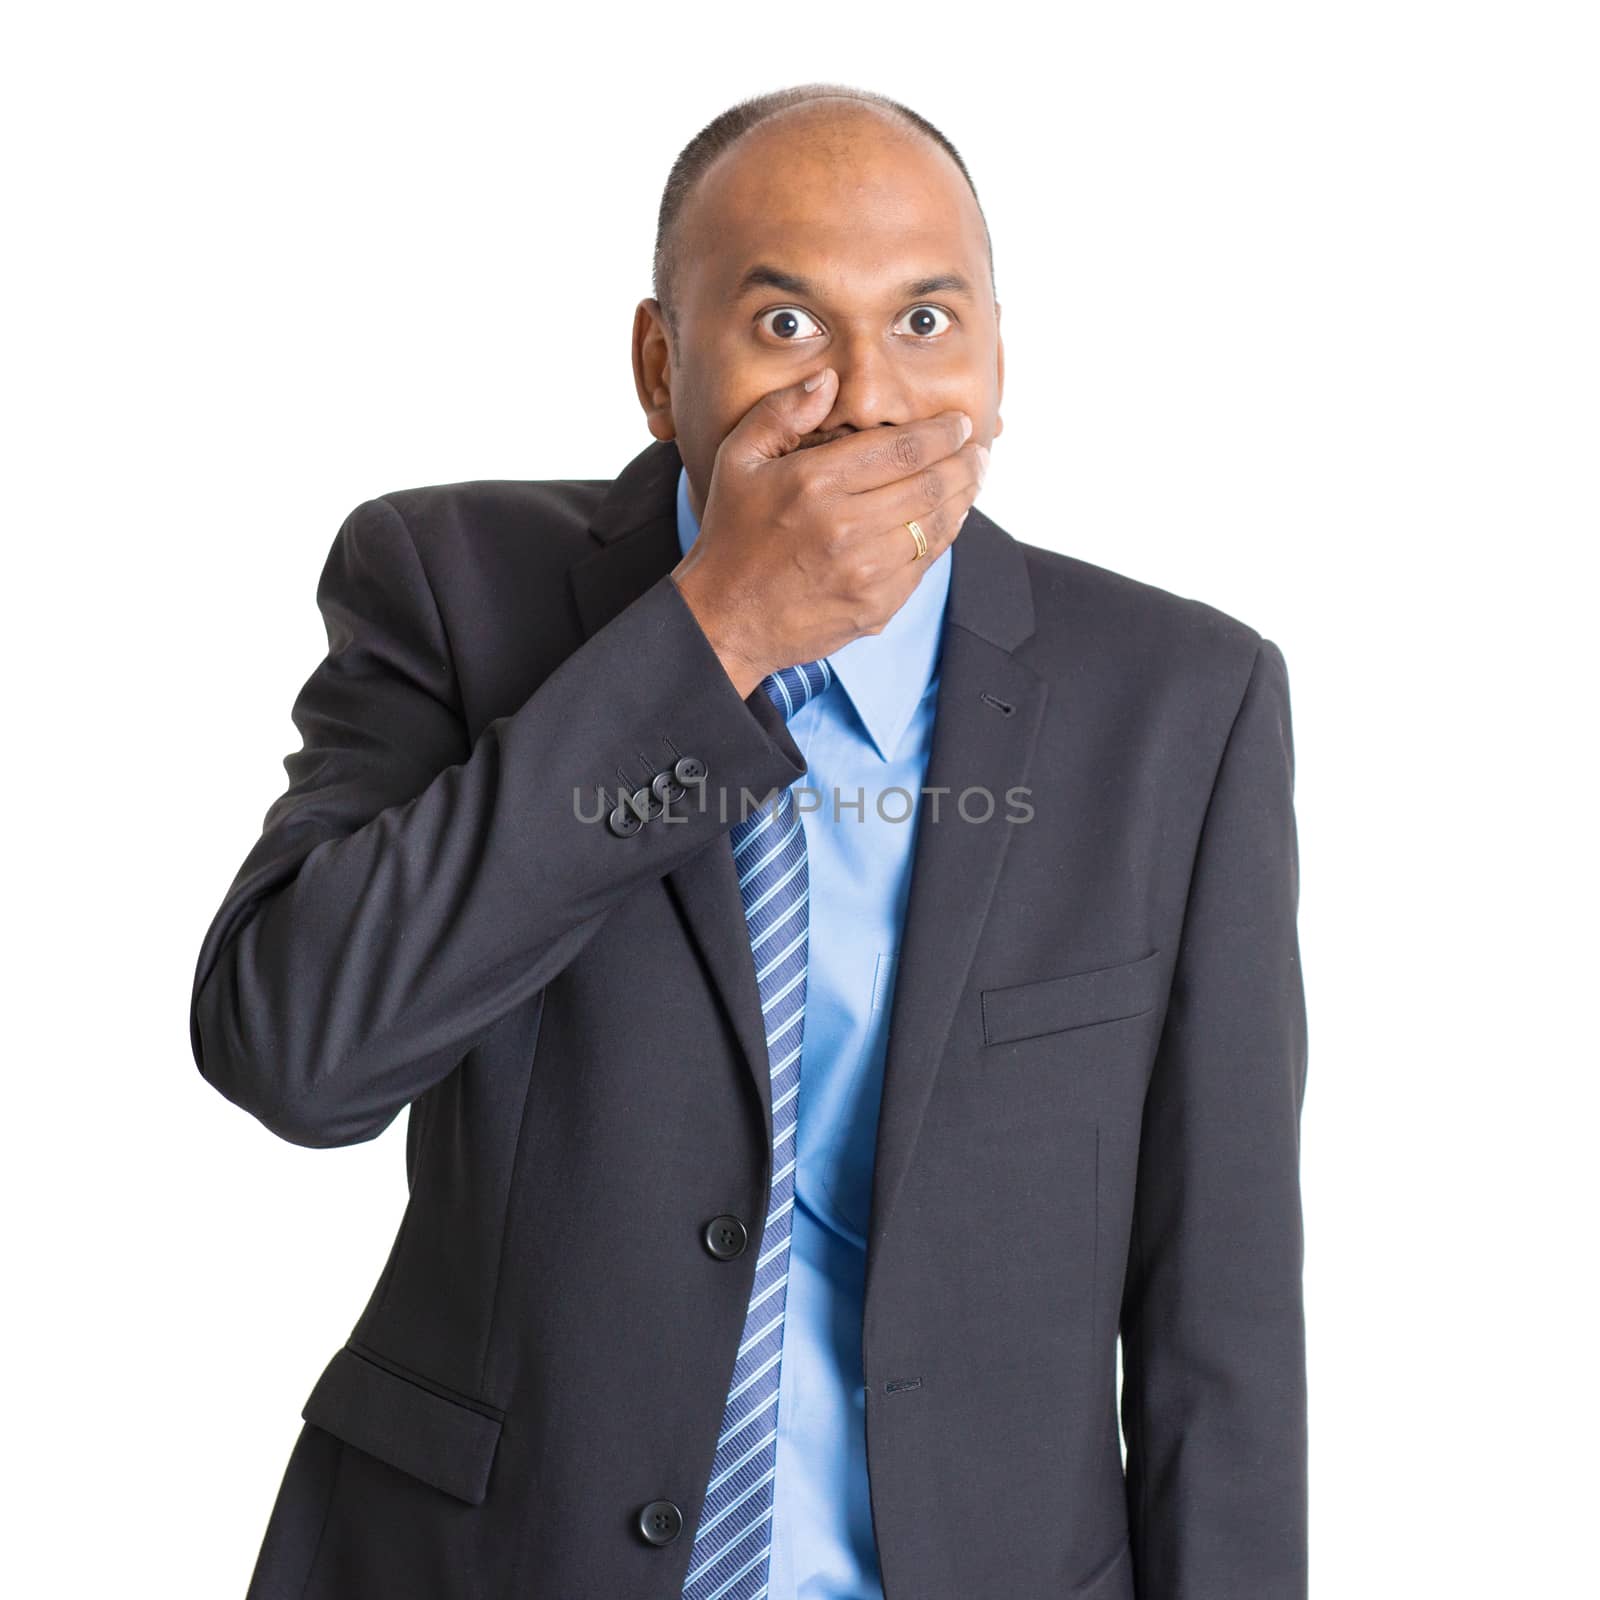 Portrait of shocked mature Indian businessman covered mouth, standing on plain background with shadow.